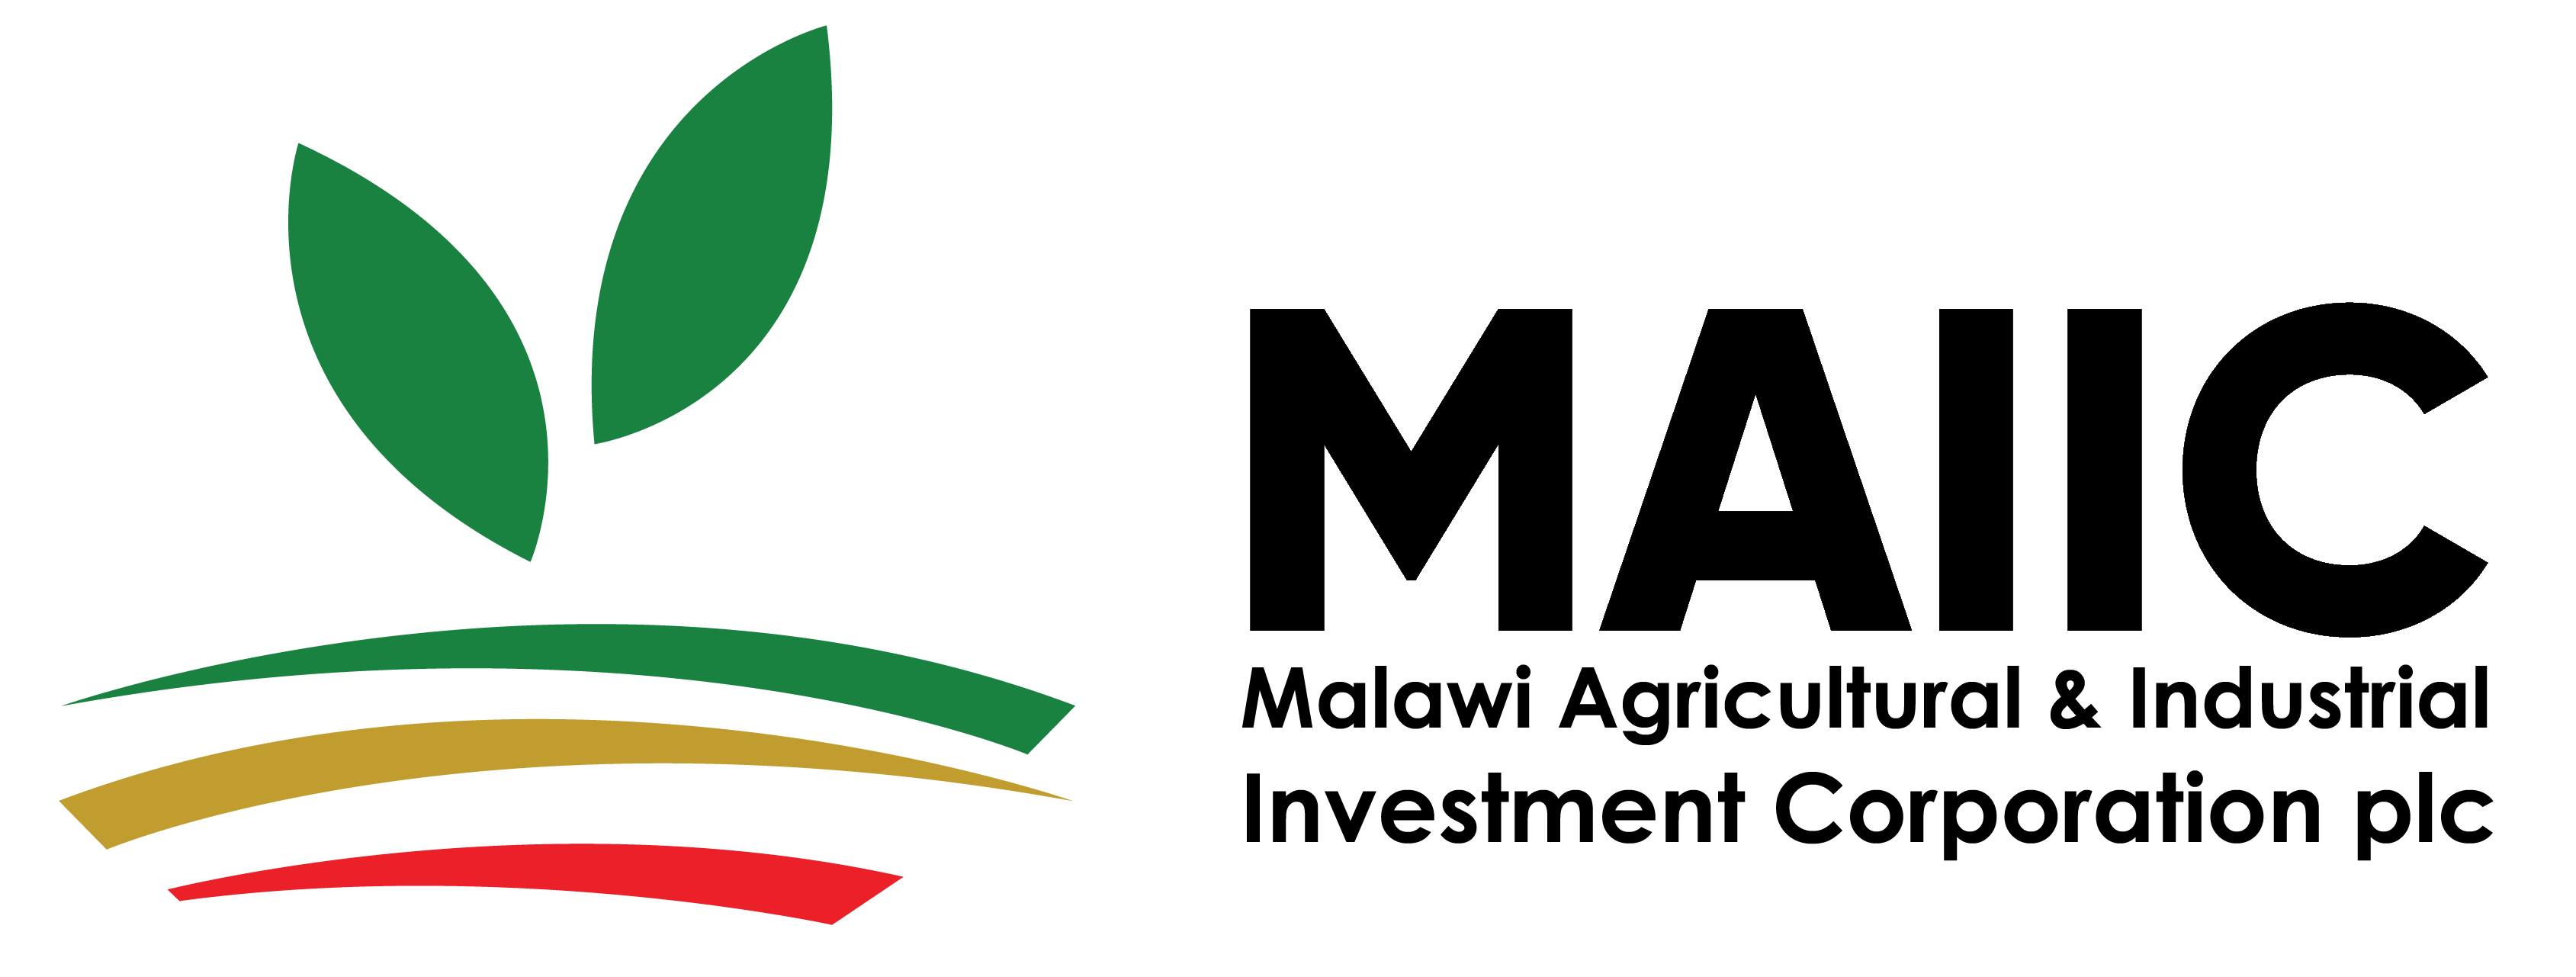 Malawi Agriculture and Industrial Investment Corporation (MAIIC)